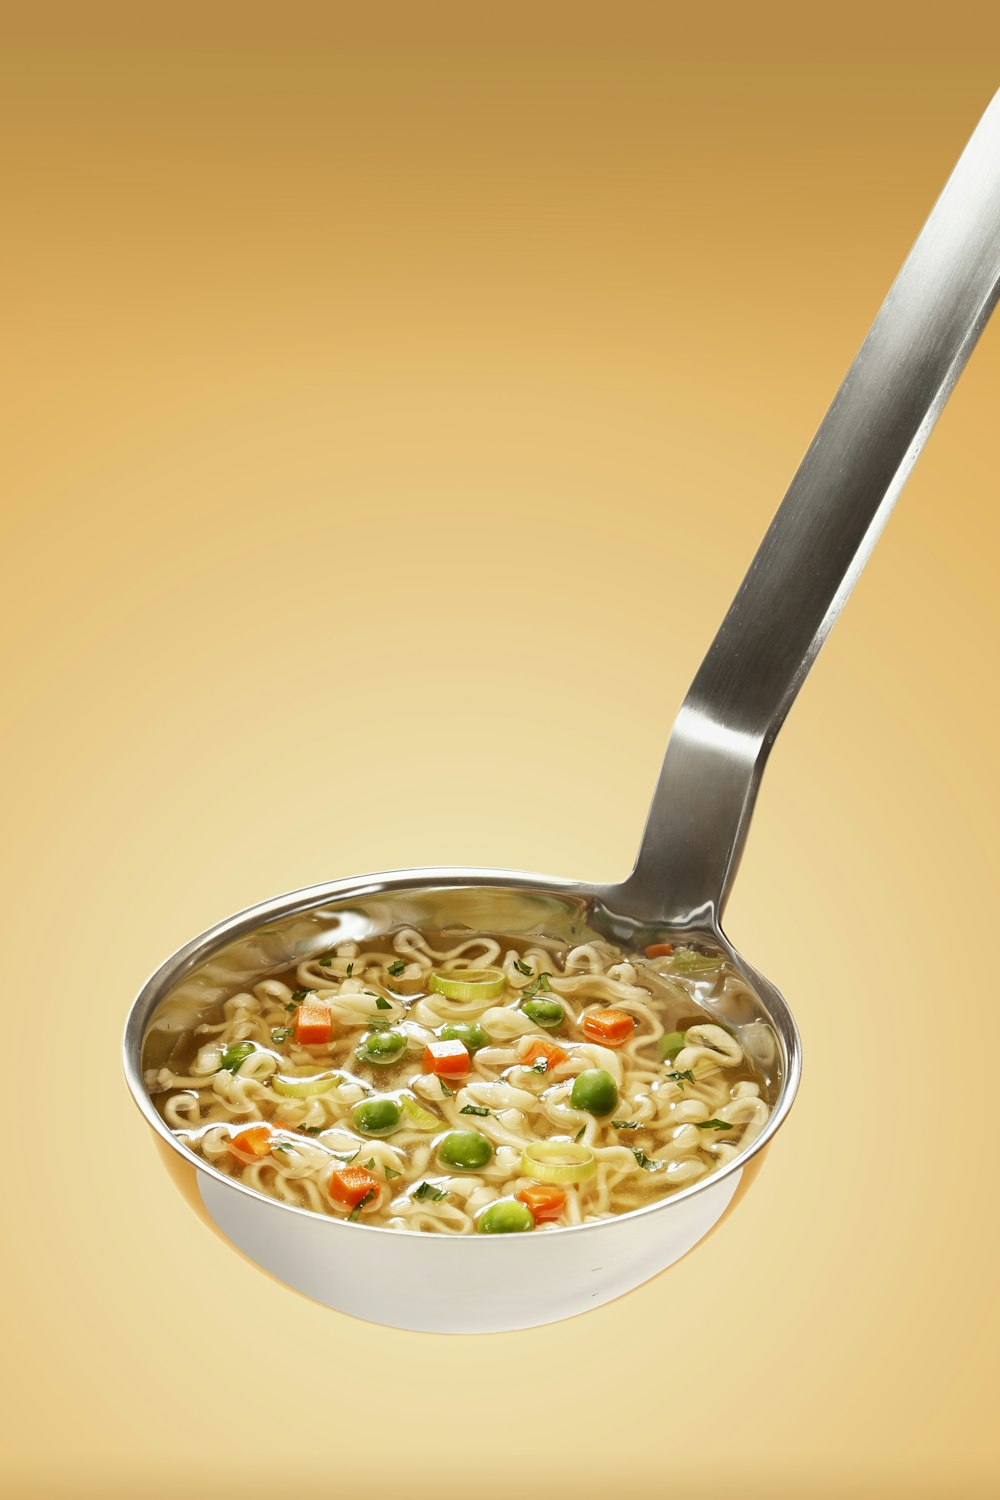 silver steel scoop with noodles - soup diet for weight loss